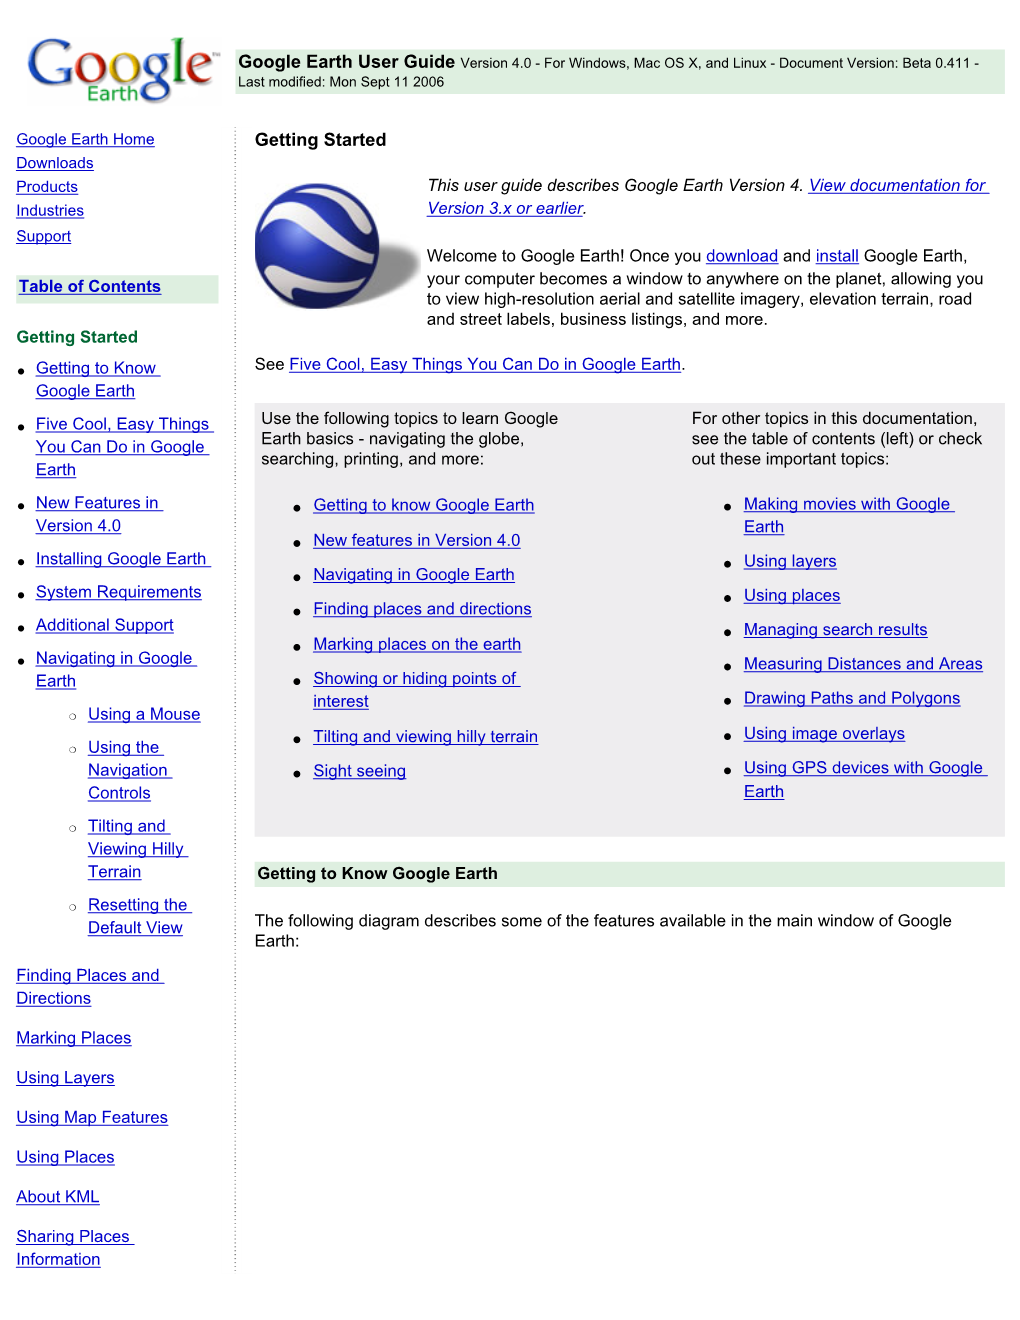 Google Earth User Guide Version 4.0 - for Windows, Mac OS X, and Linux - Document Version: Beta 0.411 - Last Modified: Mon Sept 11 2006